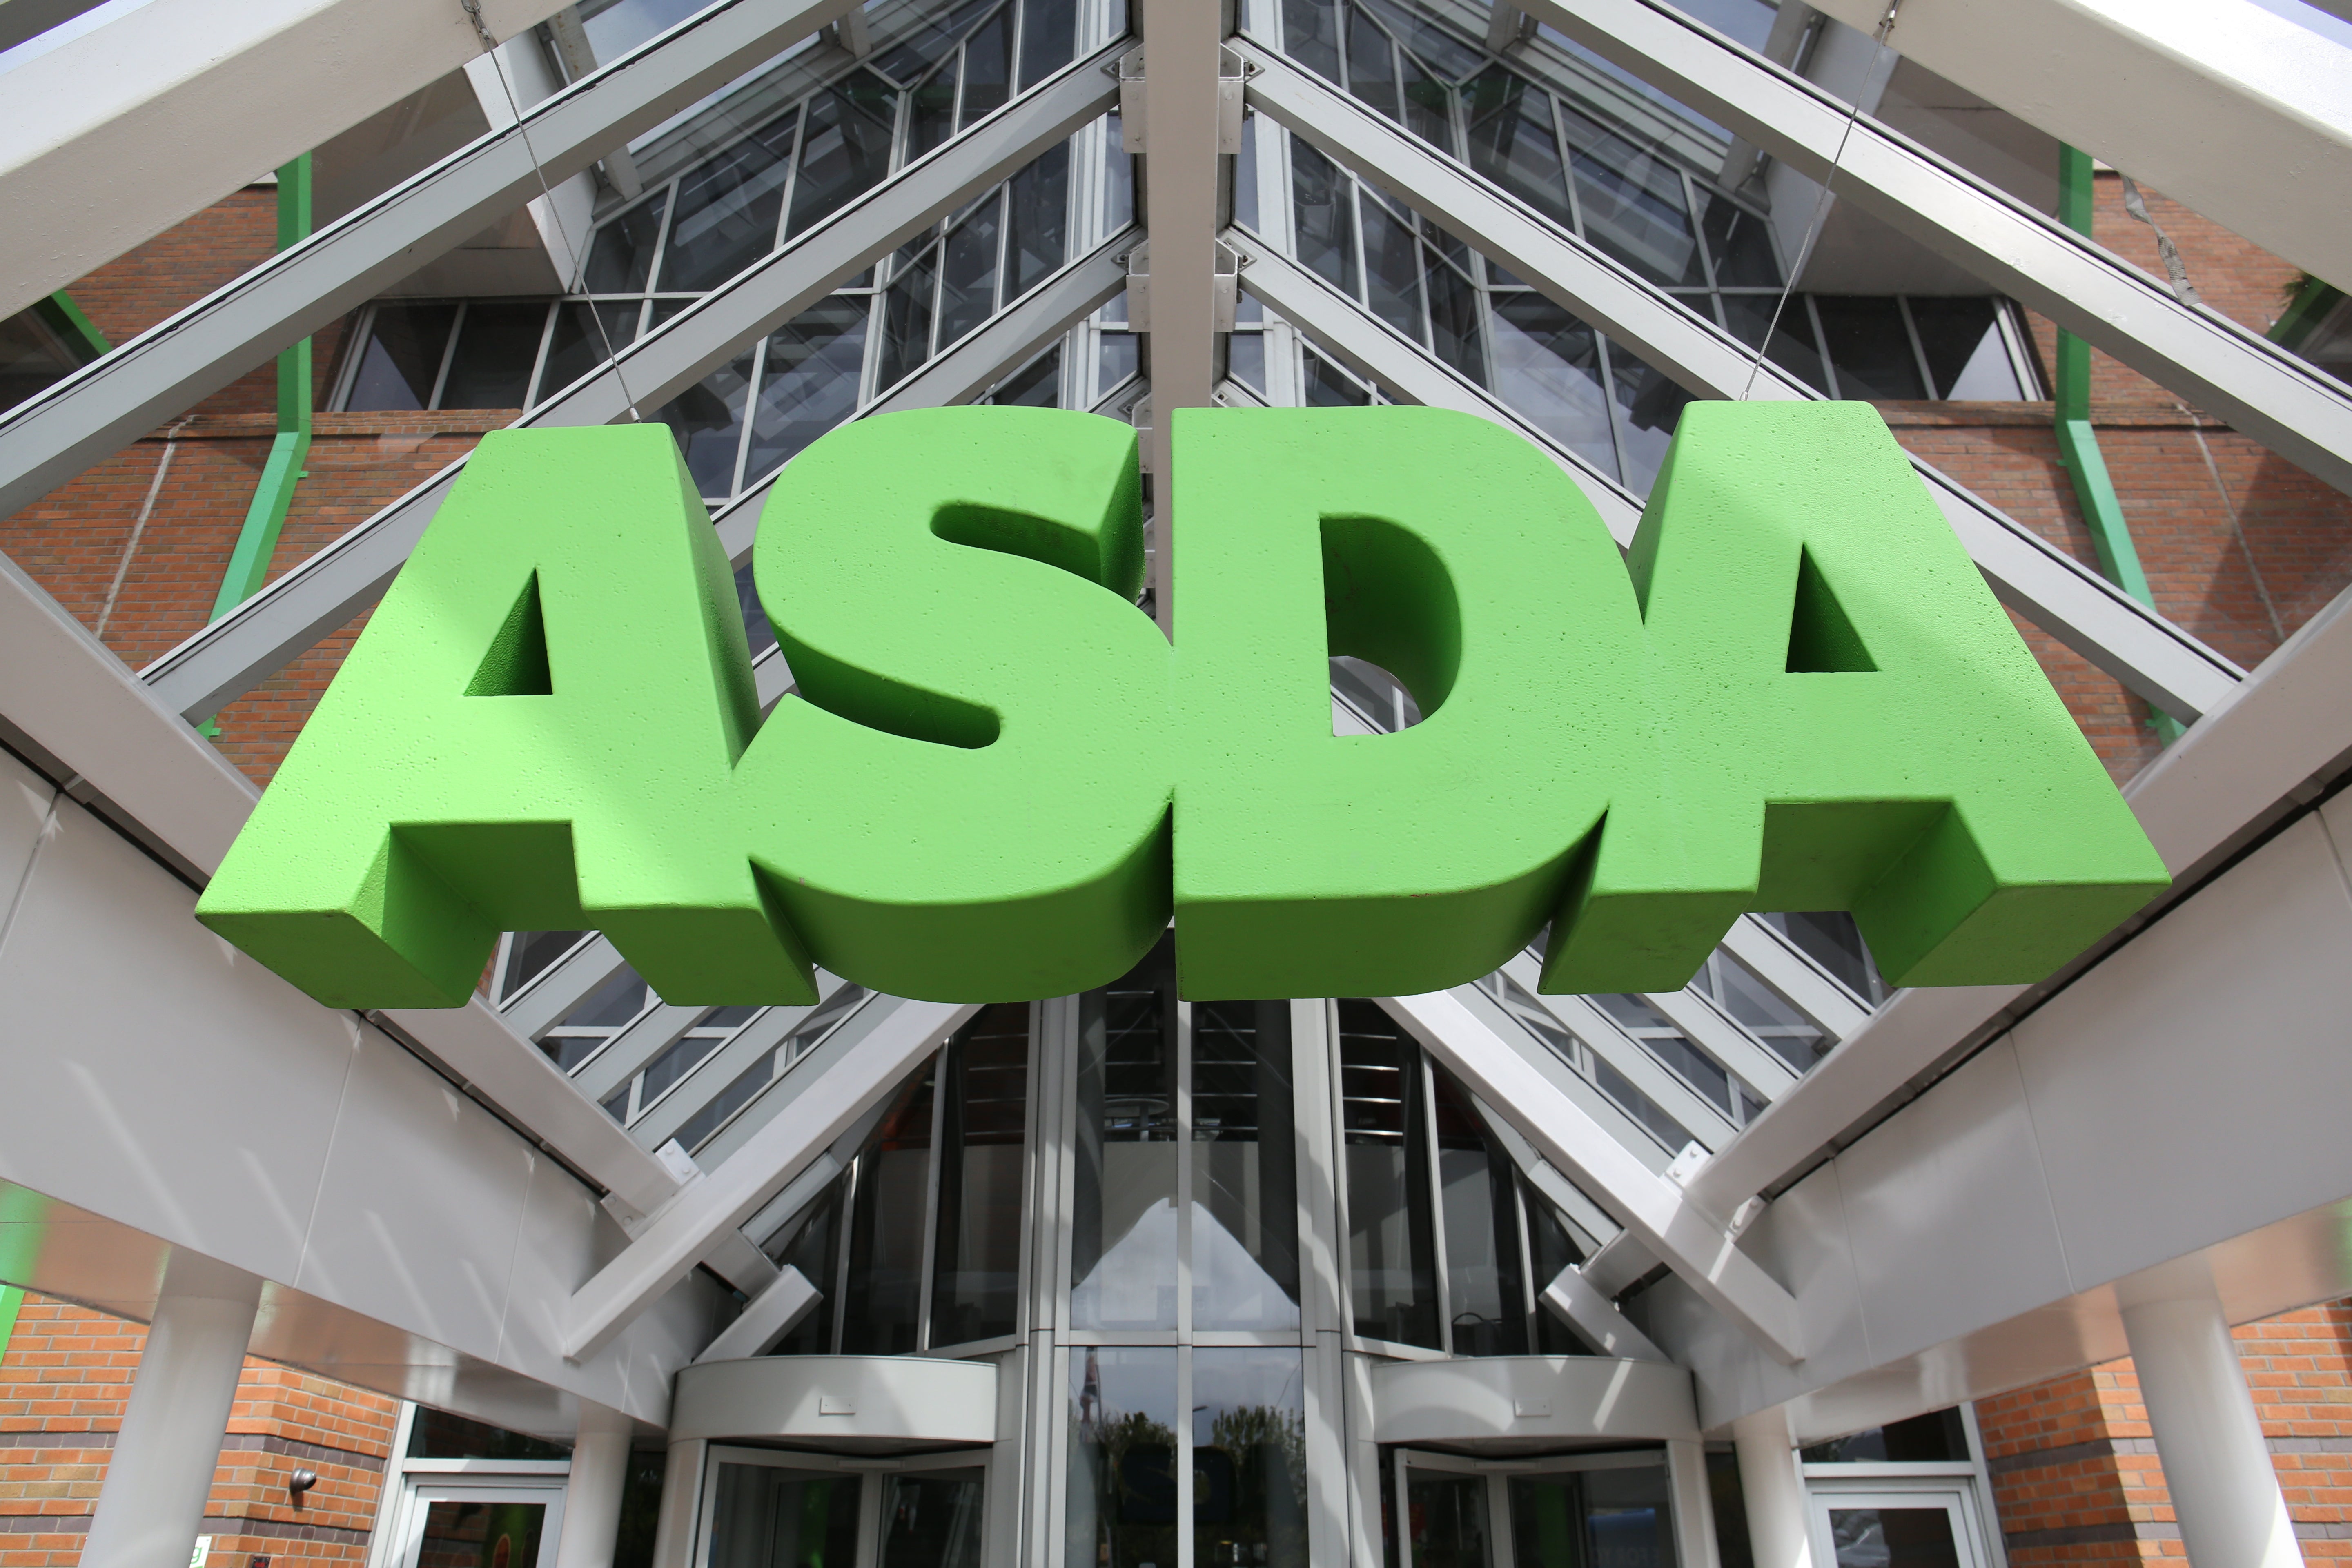 A popular food item has been recalled from Asda stores due to potential health risks